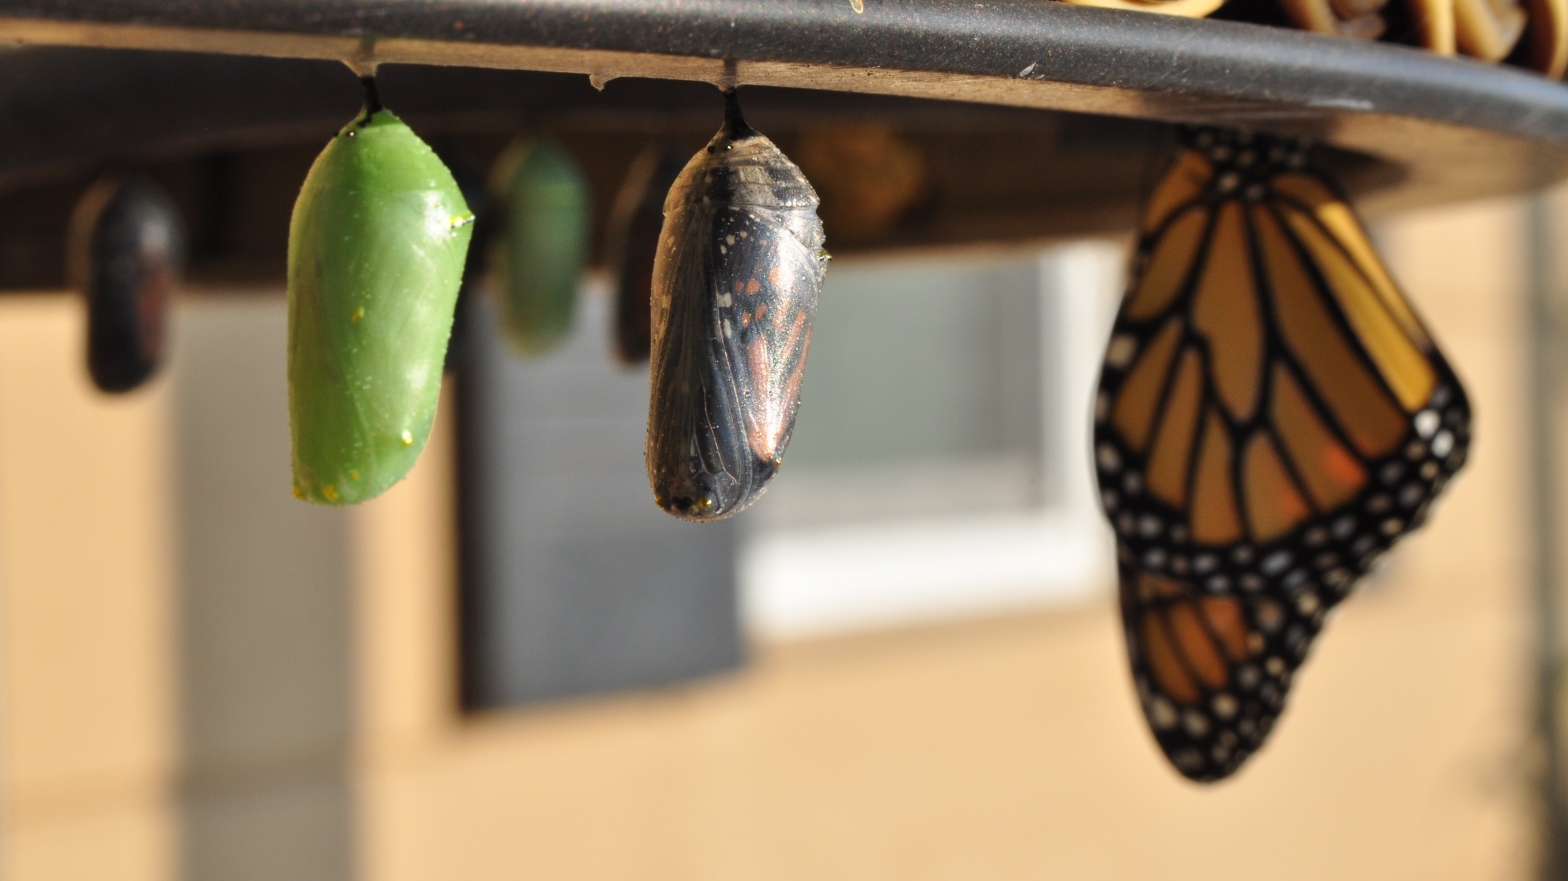 Image shows chrysalises at various stages and an emerging butterfly.